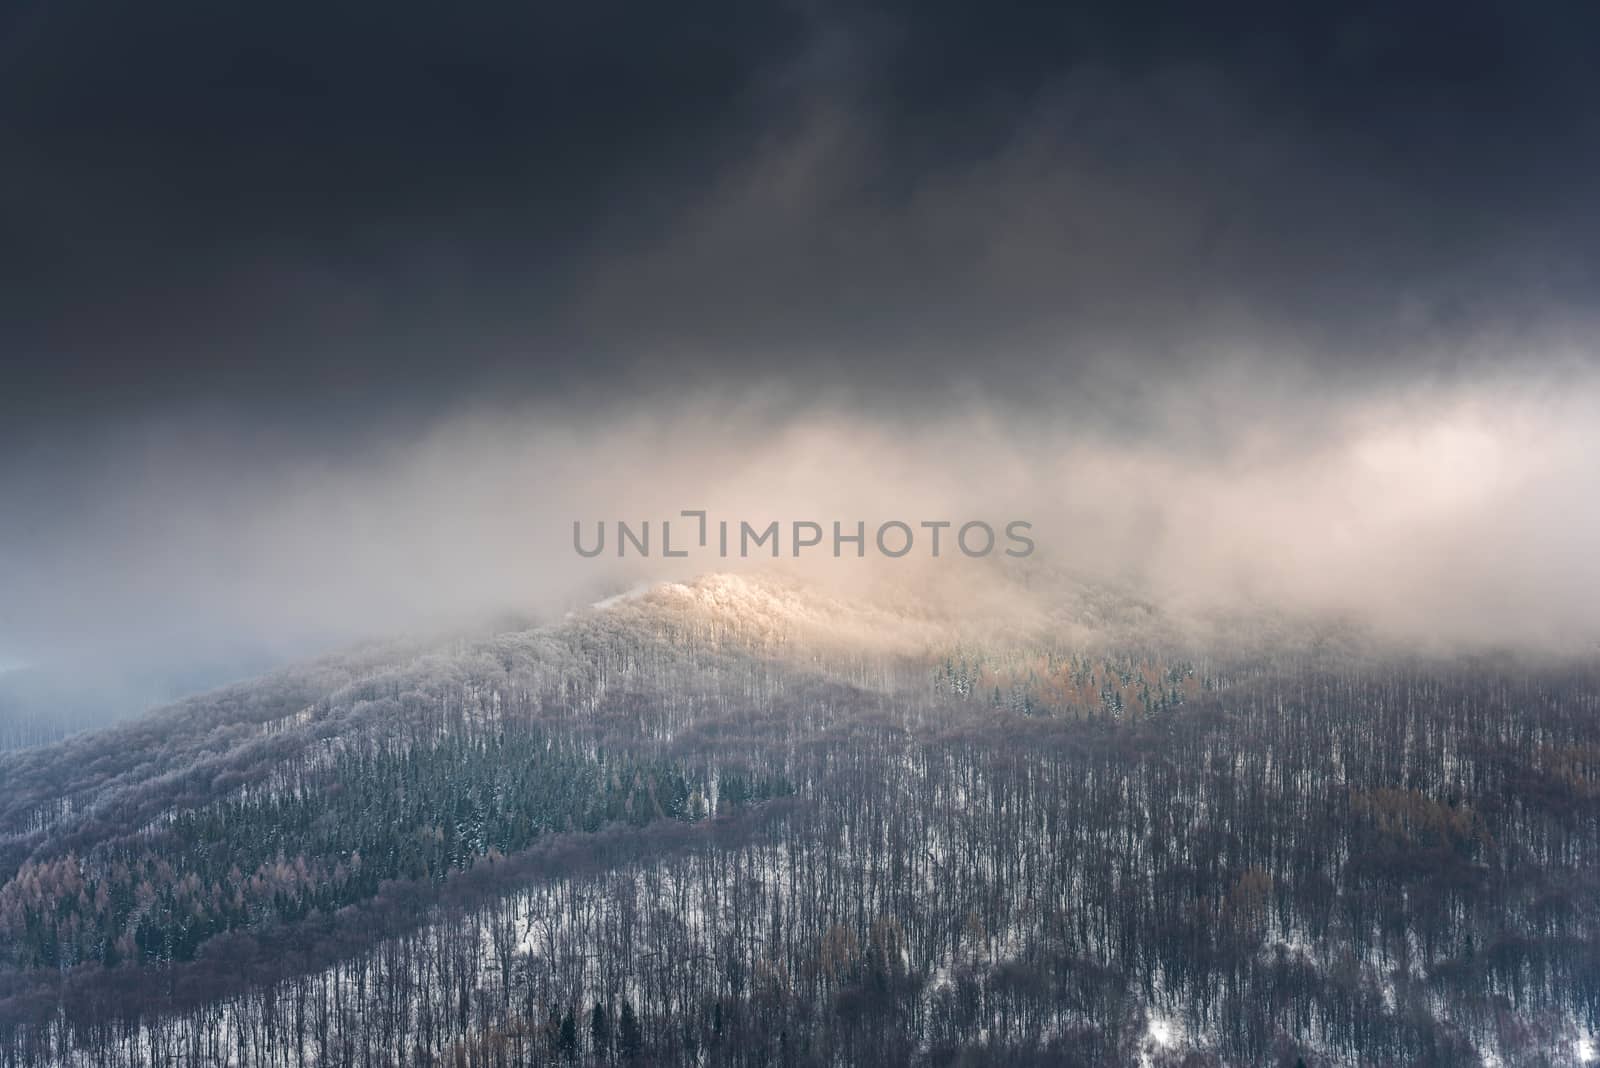 Dramatic and Moody Image of Weather in Mountains at Winter Time.